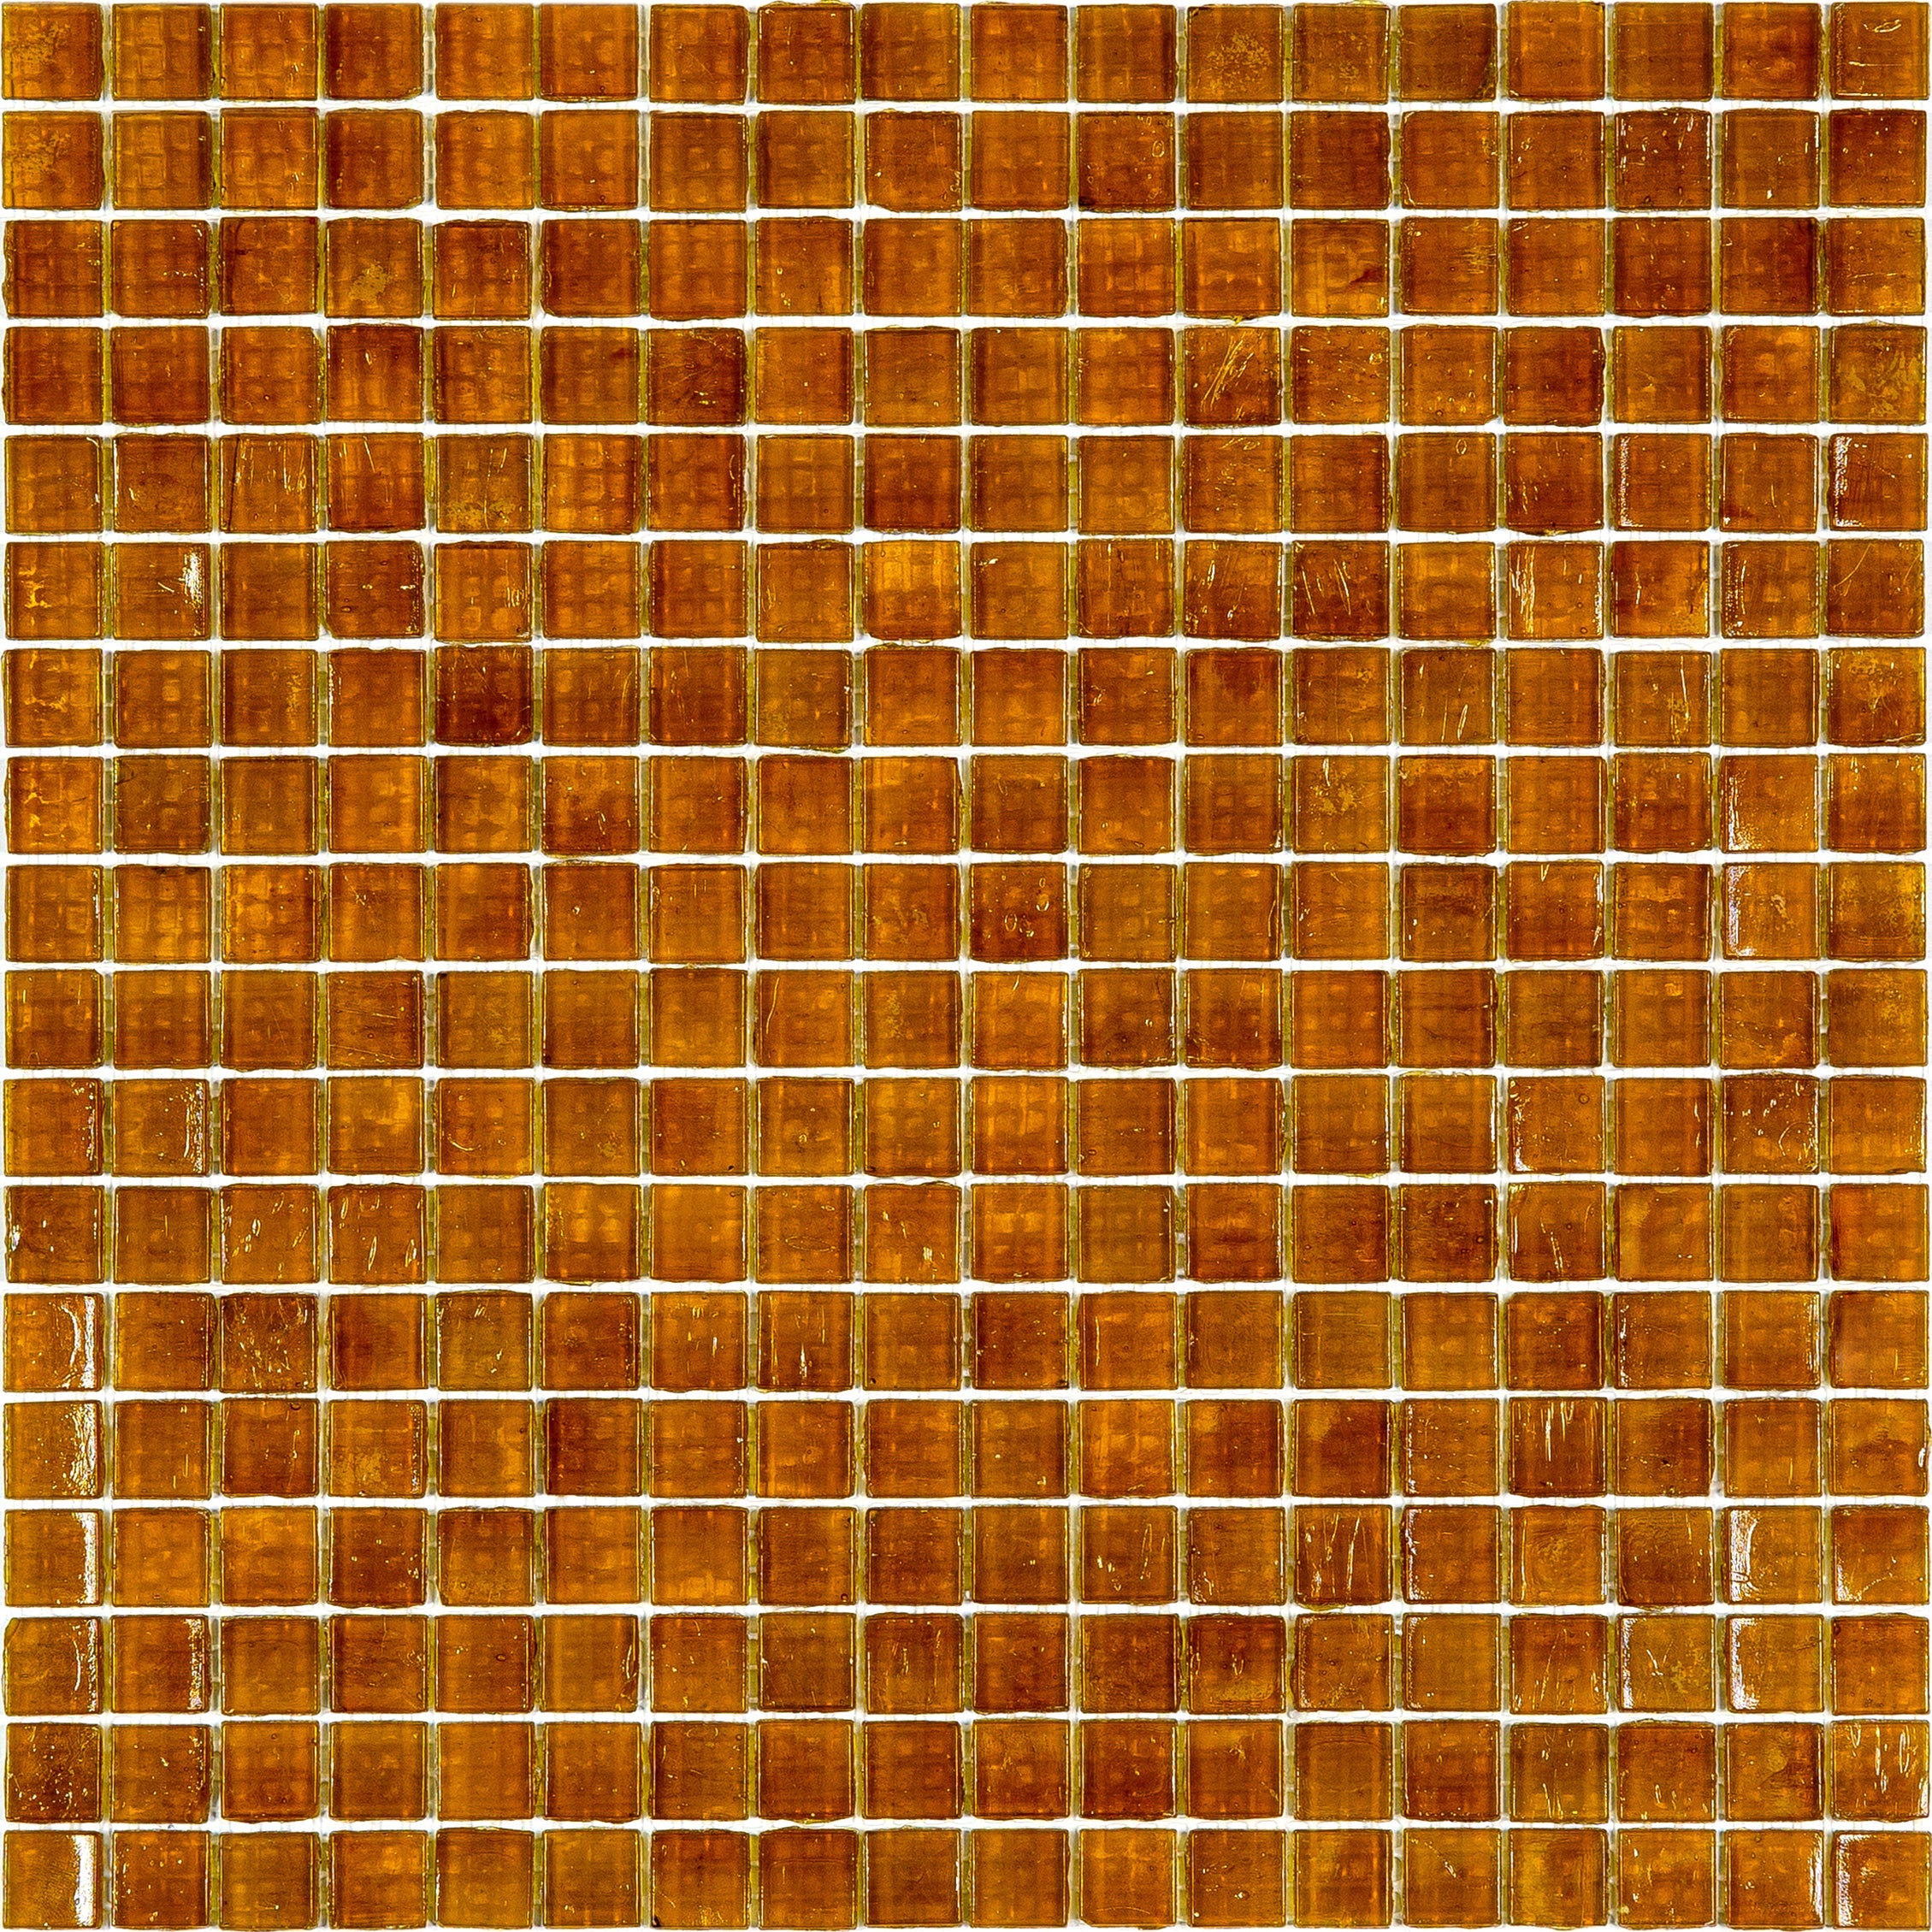 mir alma solid colors 0_6 inch nibble nt42 wall and floor mosaic distributed by surface group natural materials